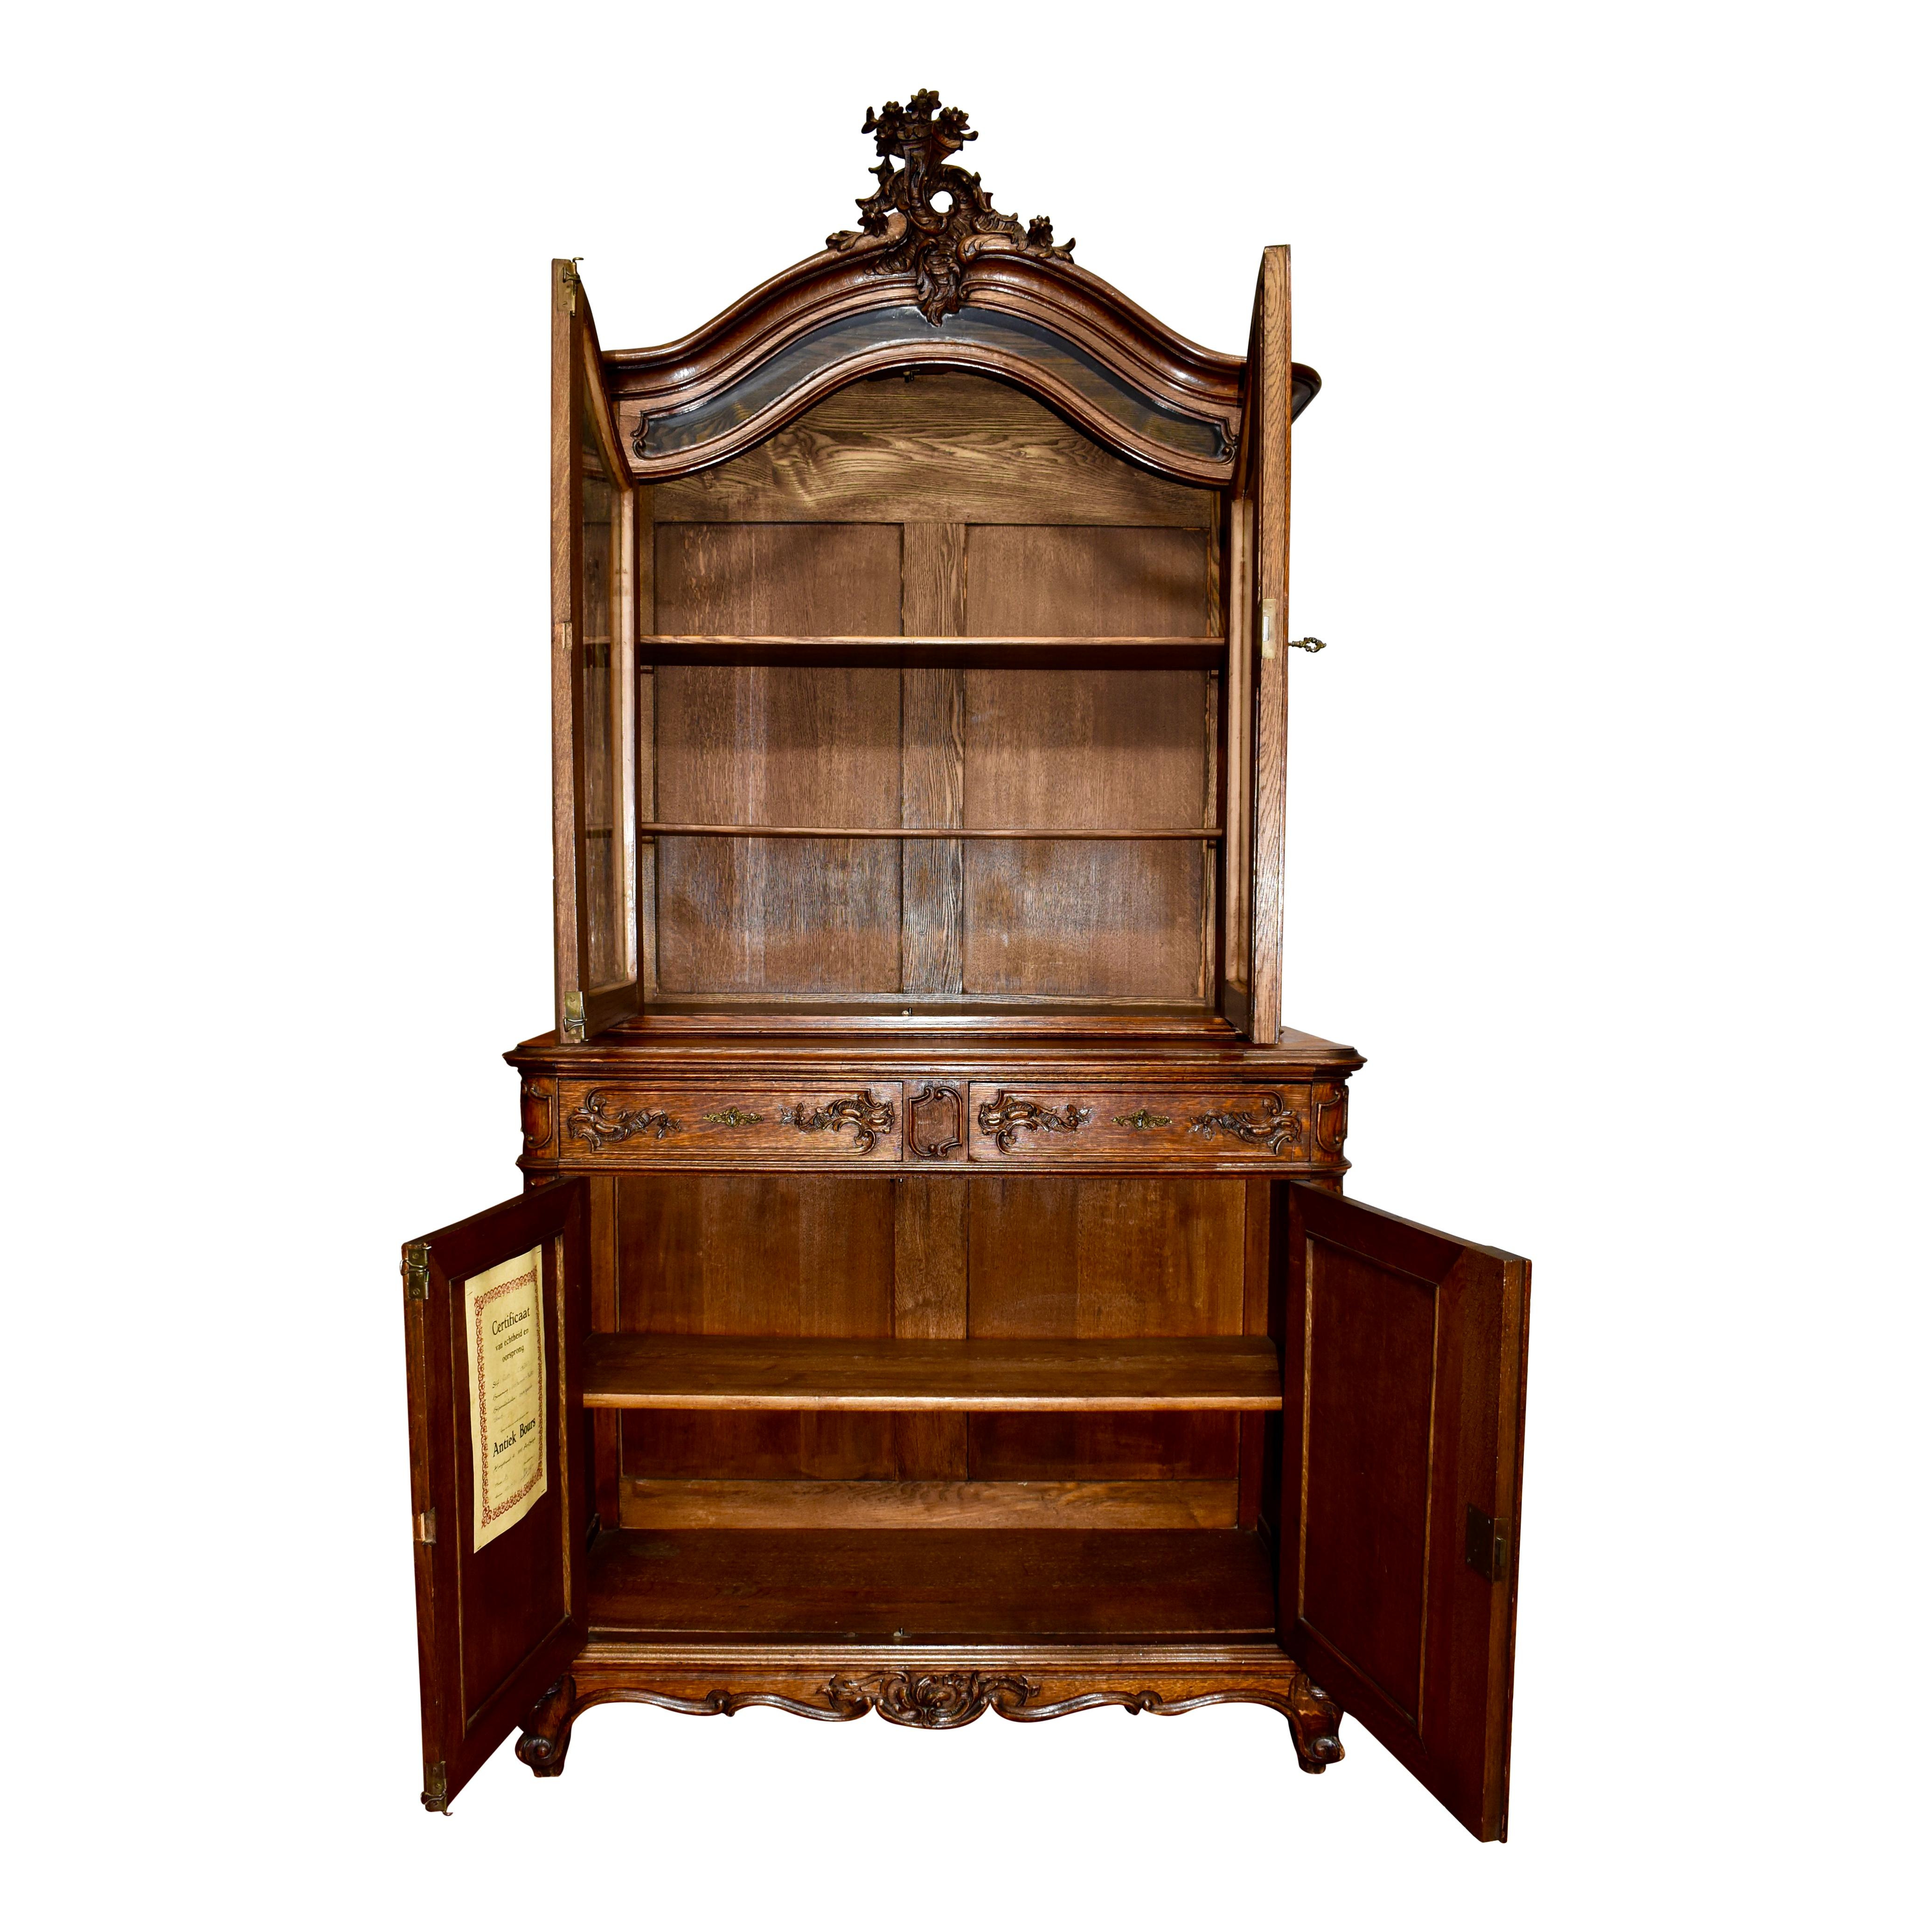 An arched cornice culminates in a beautifully pierced, foliated design incorporating flowers, ruffles, and scrolled leaves atop this oak vitrine. The arched, double doors with glass panes of the upper gallery are overlain with pierced foliated